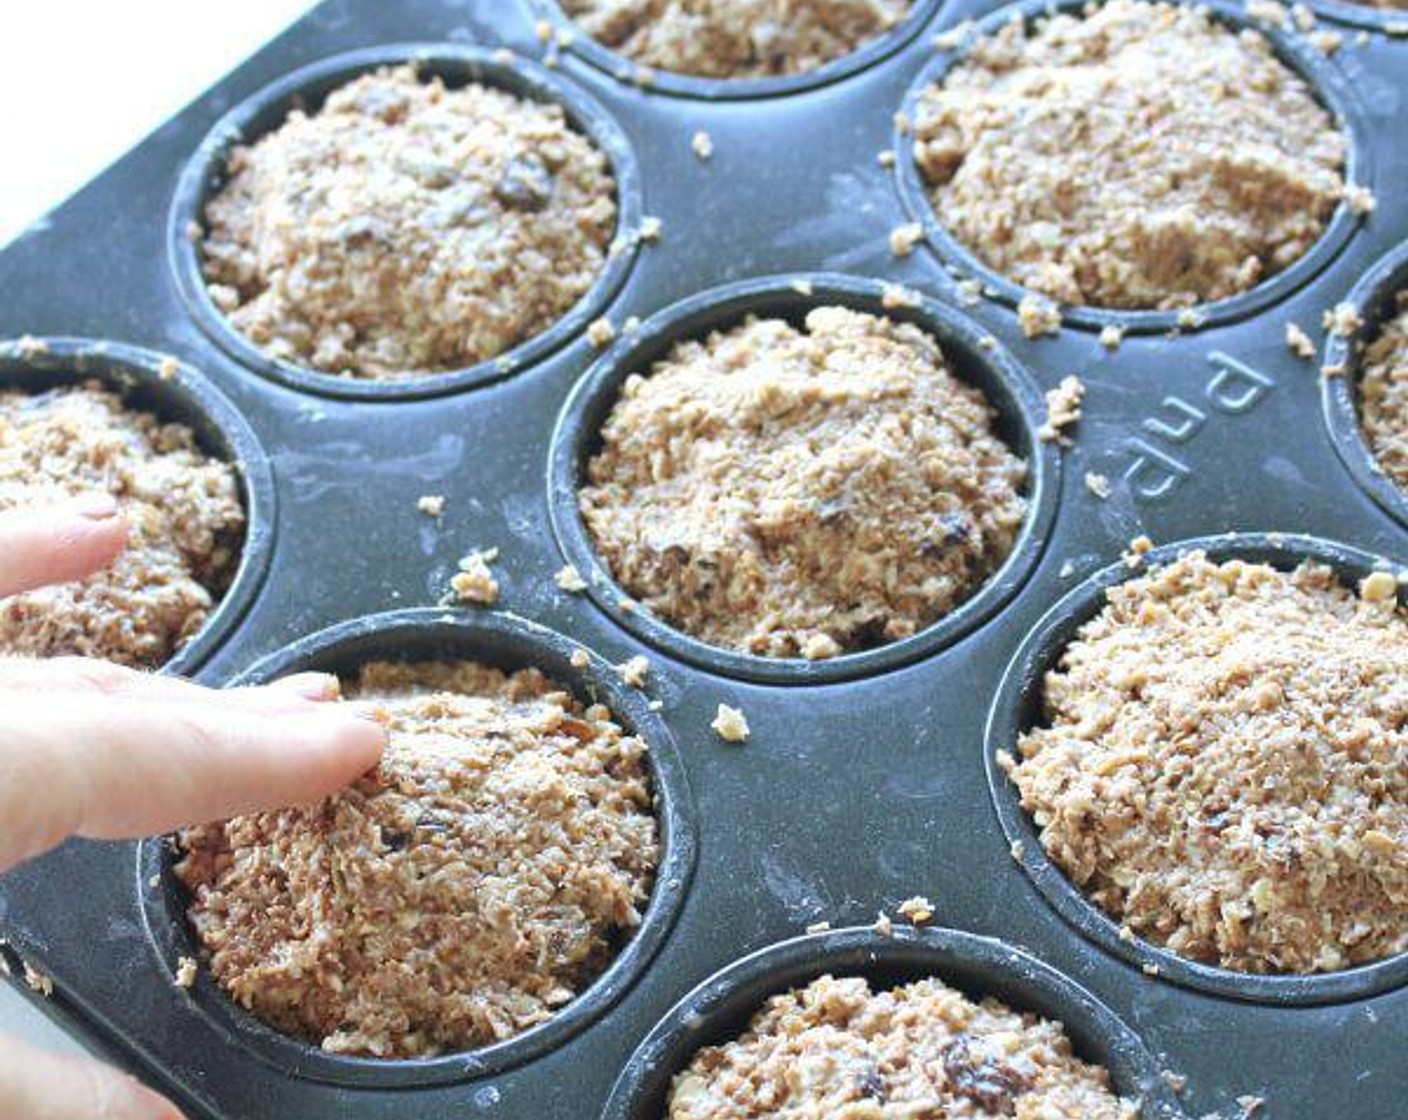 step 5 Pack the mixture into the muffin cups right to the top, and press down with your fingers. Bake for 20 minutes, or until a cake tester comes out clean and the muffins are dark golden brown.